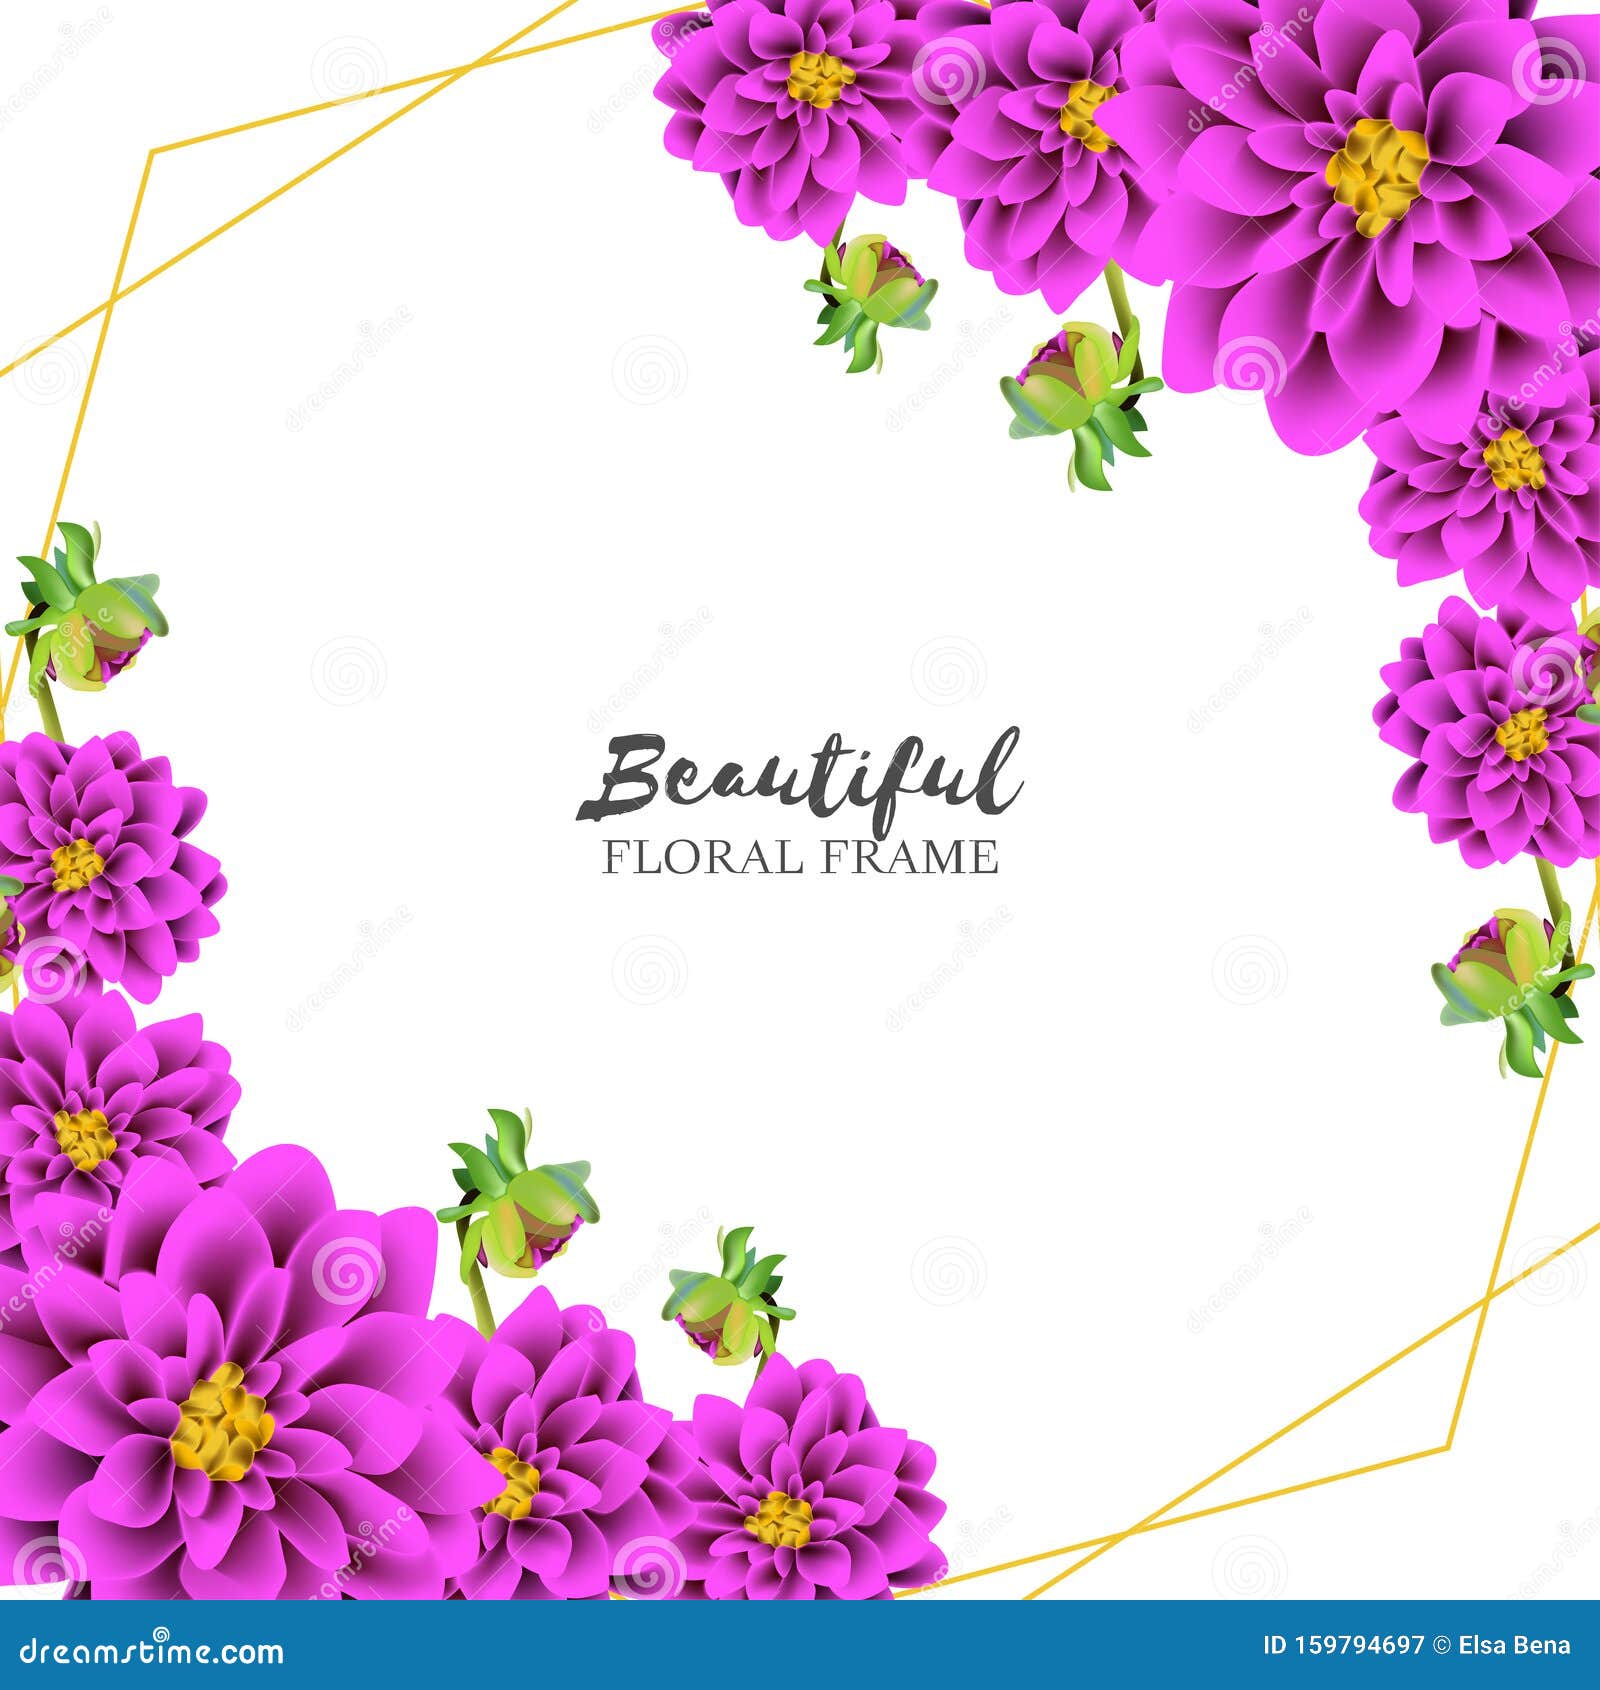 Greeting Card Template with Purple Dahlia Flower Stock For Greeting Card Layout Templates